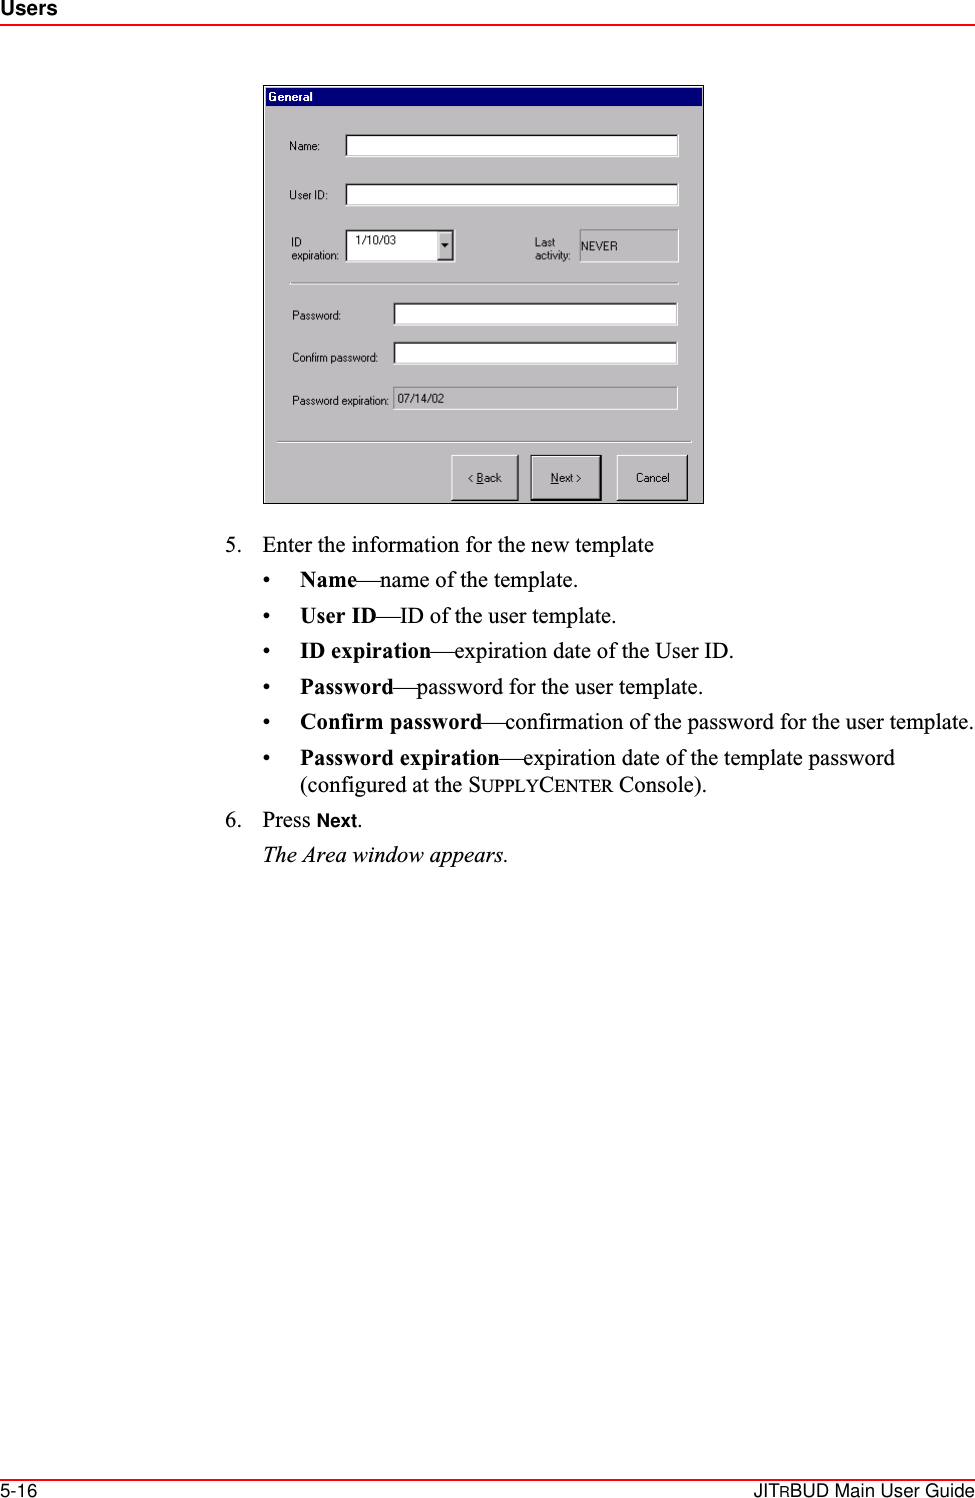 Users5-16 JITRBUD Main User Guide5. Enter the information for the new template•Name—name of the template.•User ID—ID of the user template.•ID expiration—expiration date of the User ID.•Password—password for the user template.•Confirm password—confirmation of the password for the user template.•Password expiration—expiration date of the template password (configured at the SUPPLYCENTER Console).6. Press Next.The Area window appears.